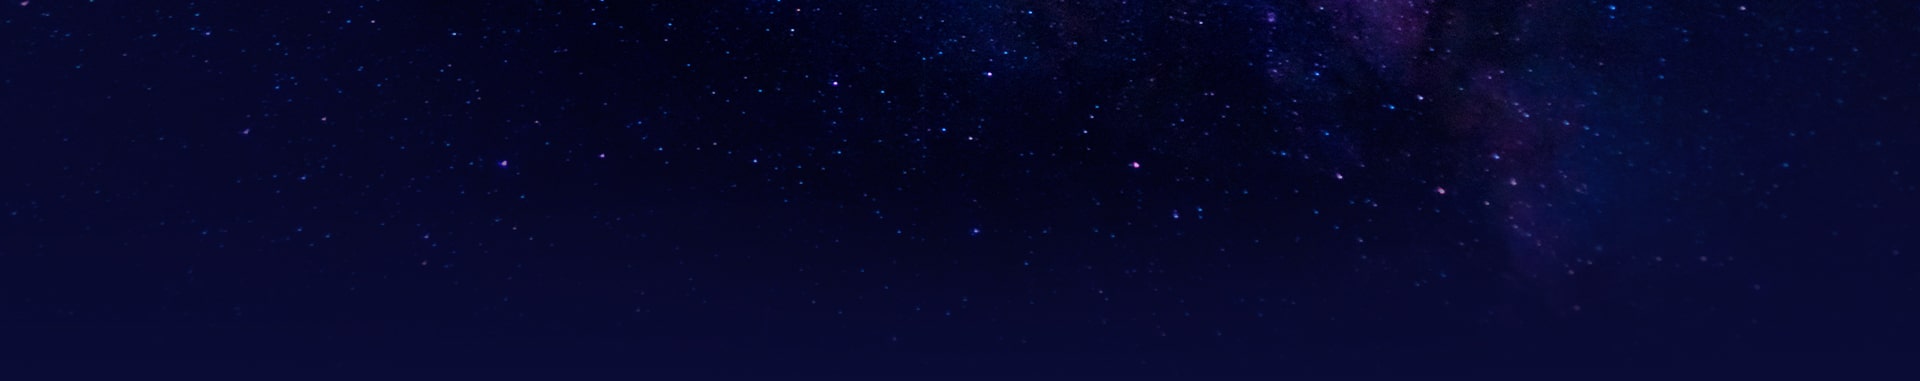 Dark Space View With Stars Banner